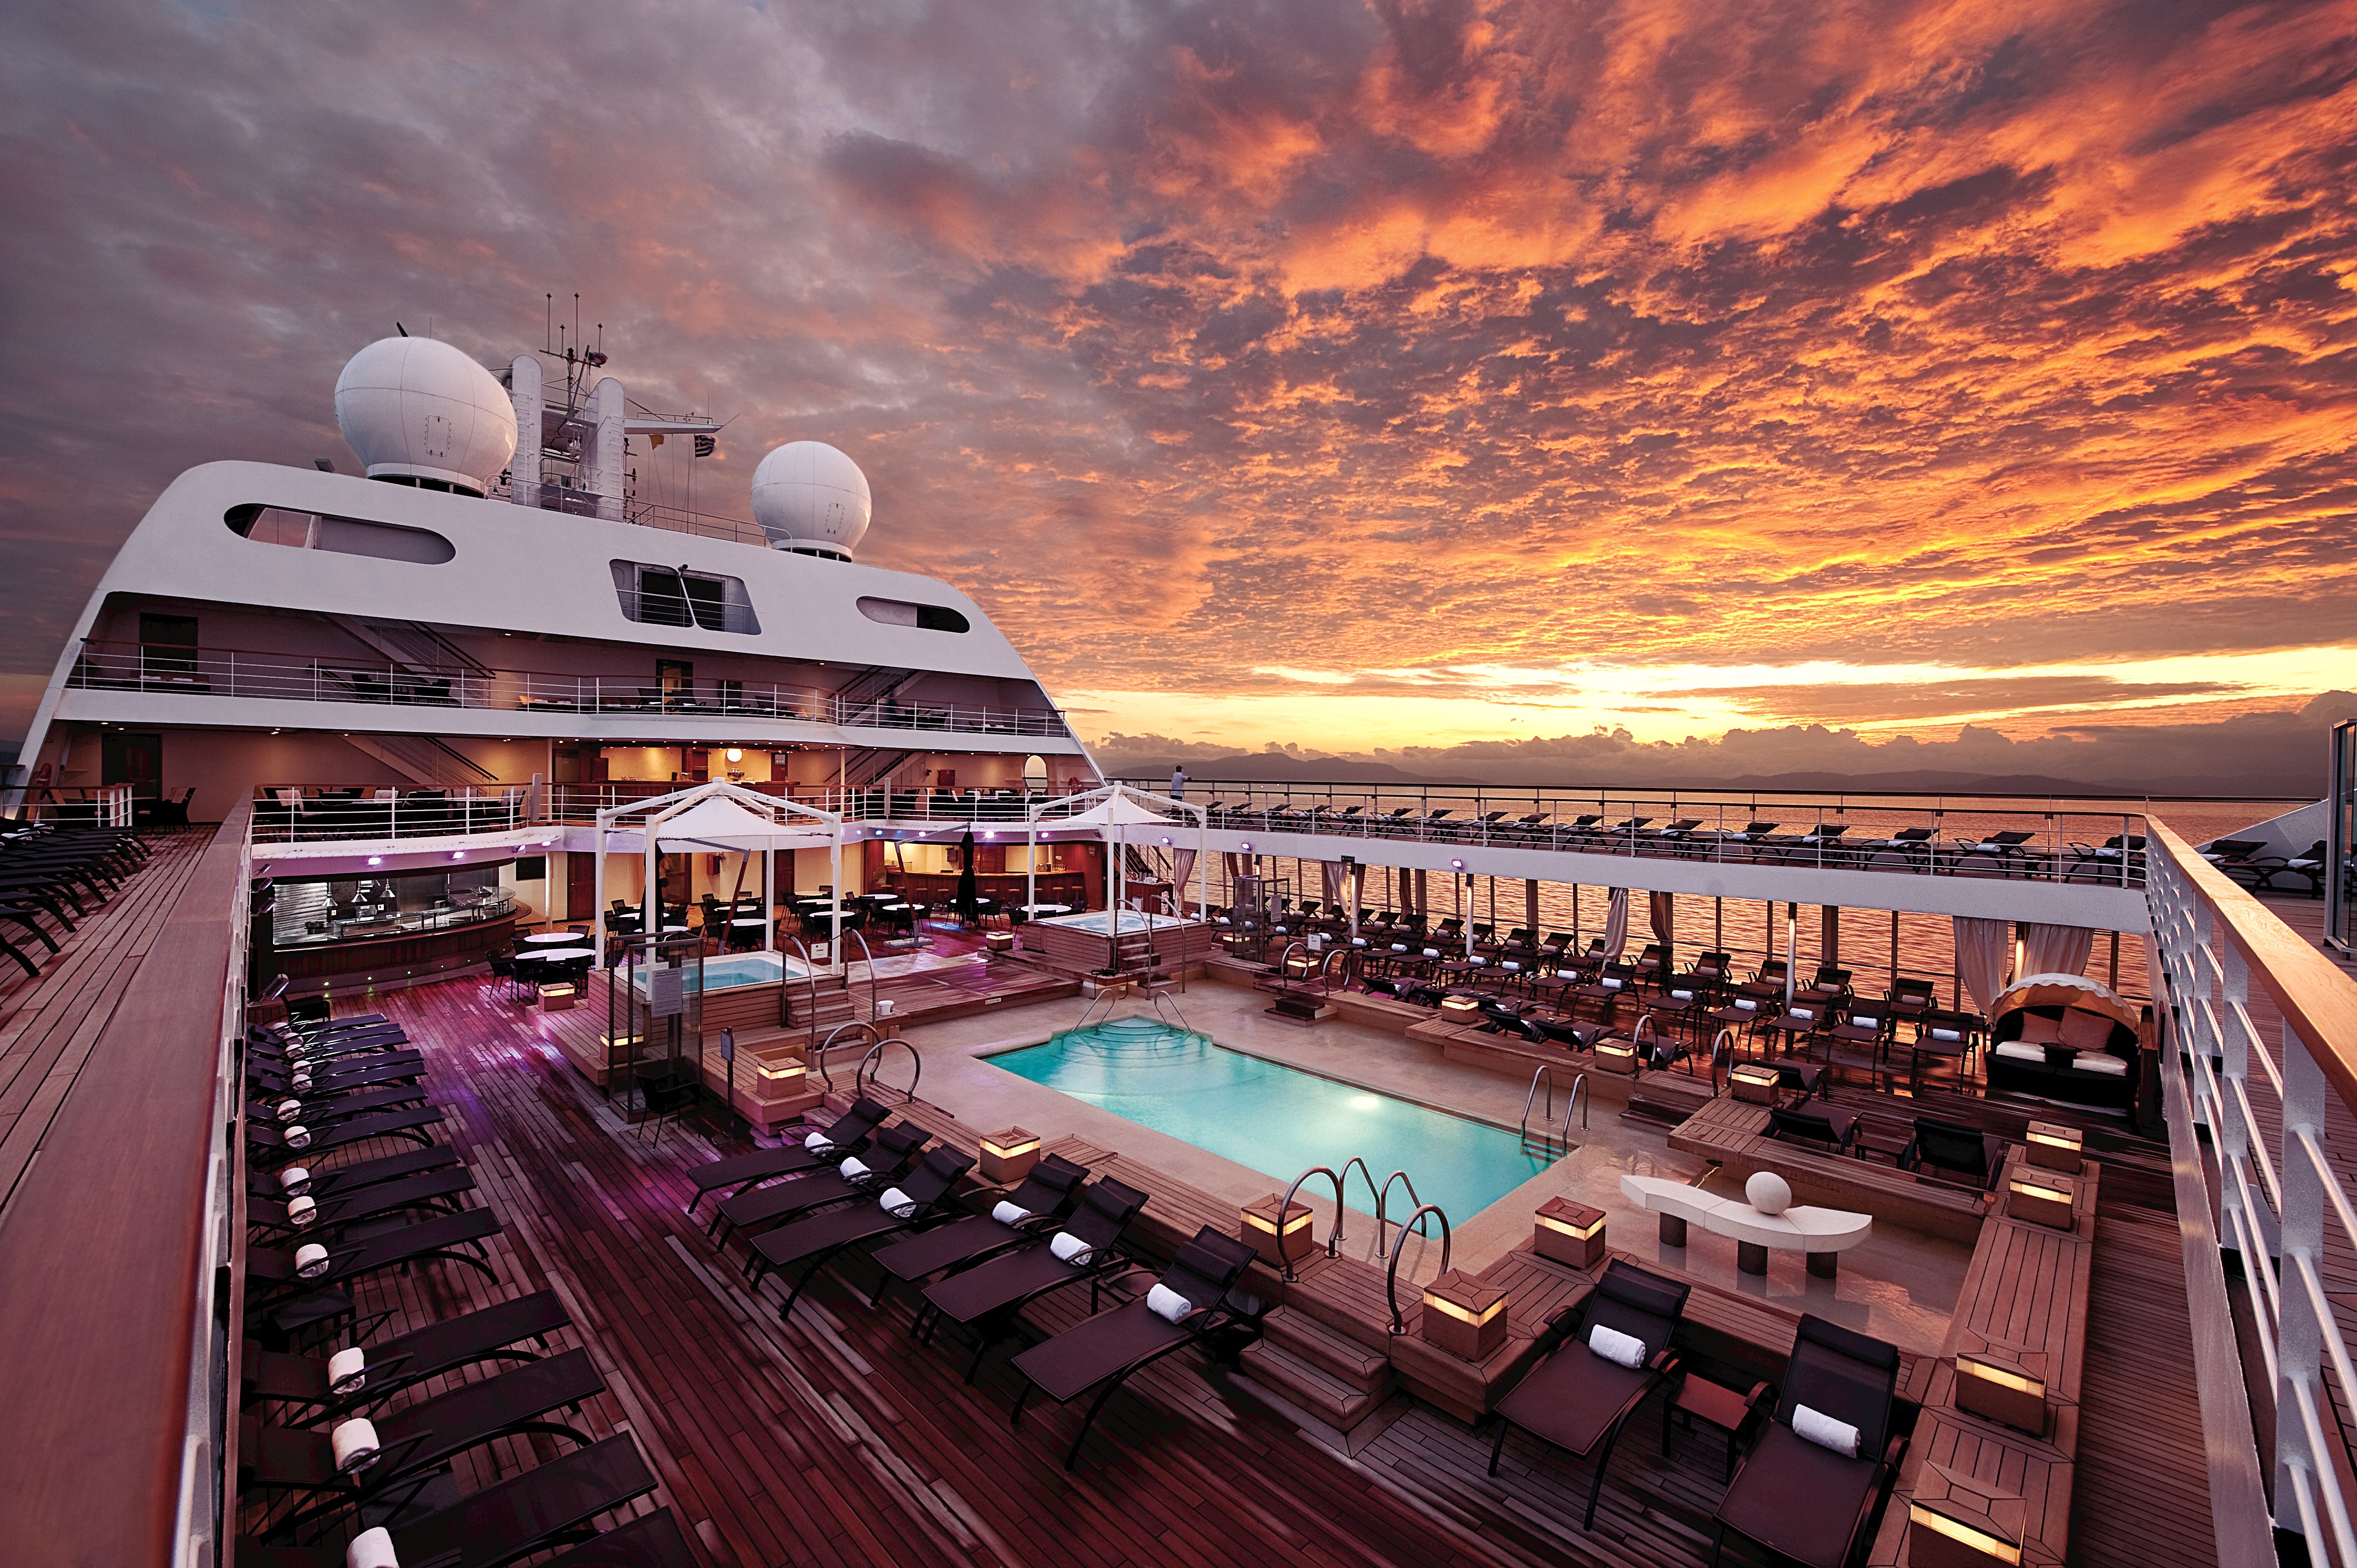 Onboard a luxurious Seabourn cruise ship